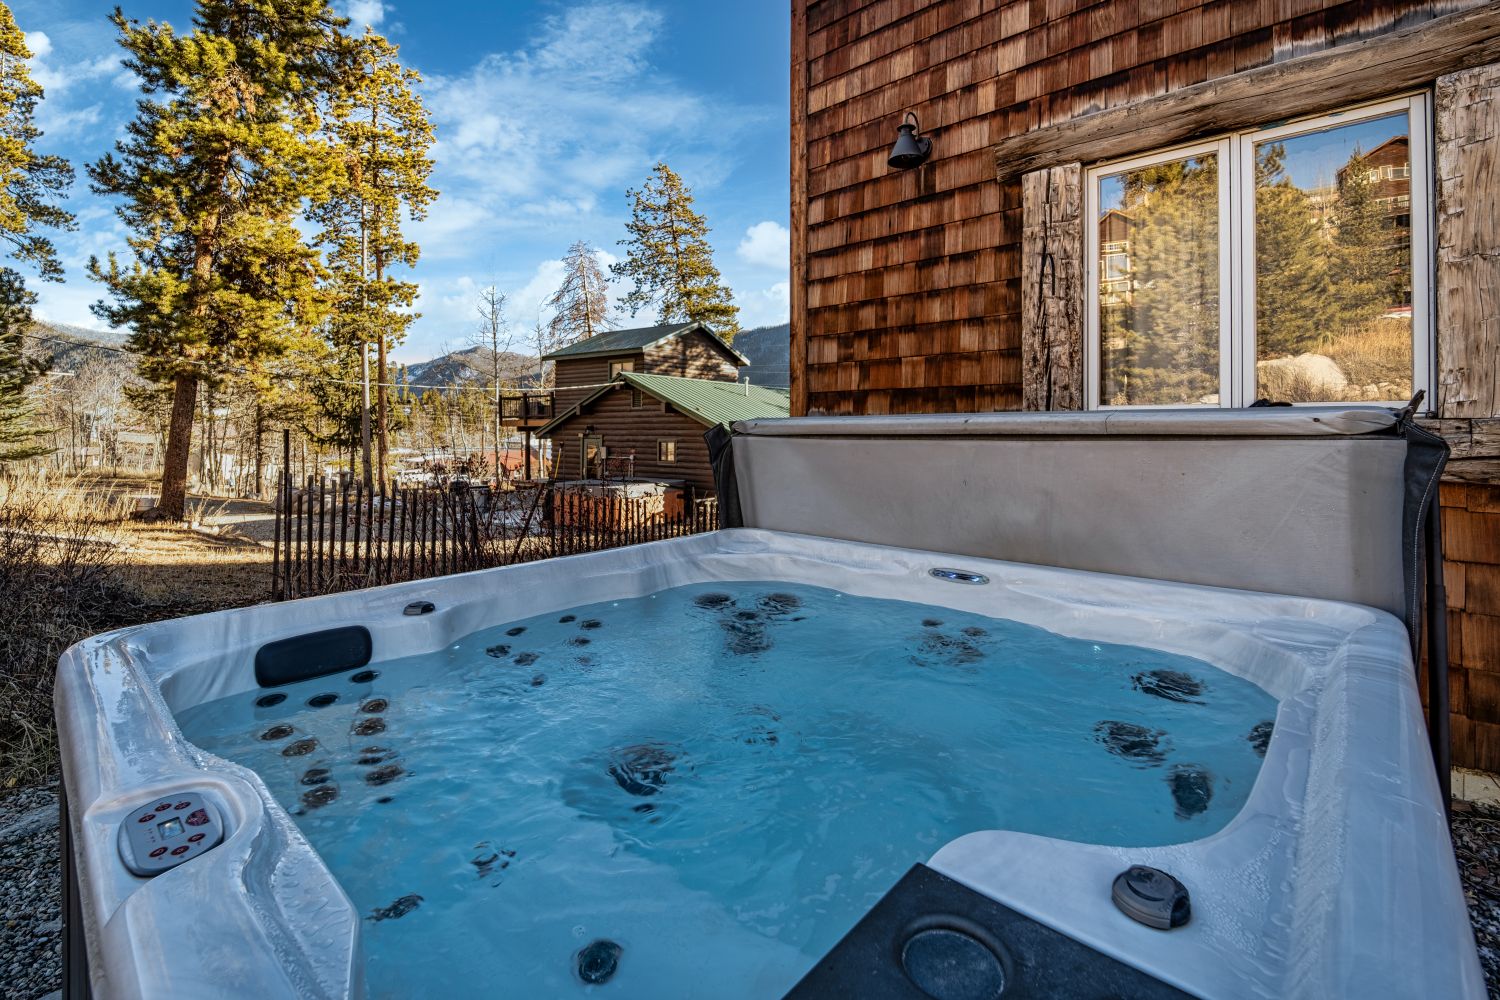 Private Hot Tub perfect for relaxing after long day of play - 